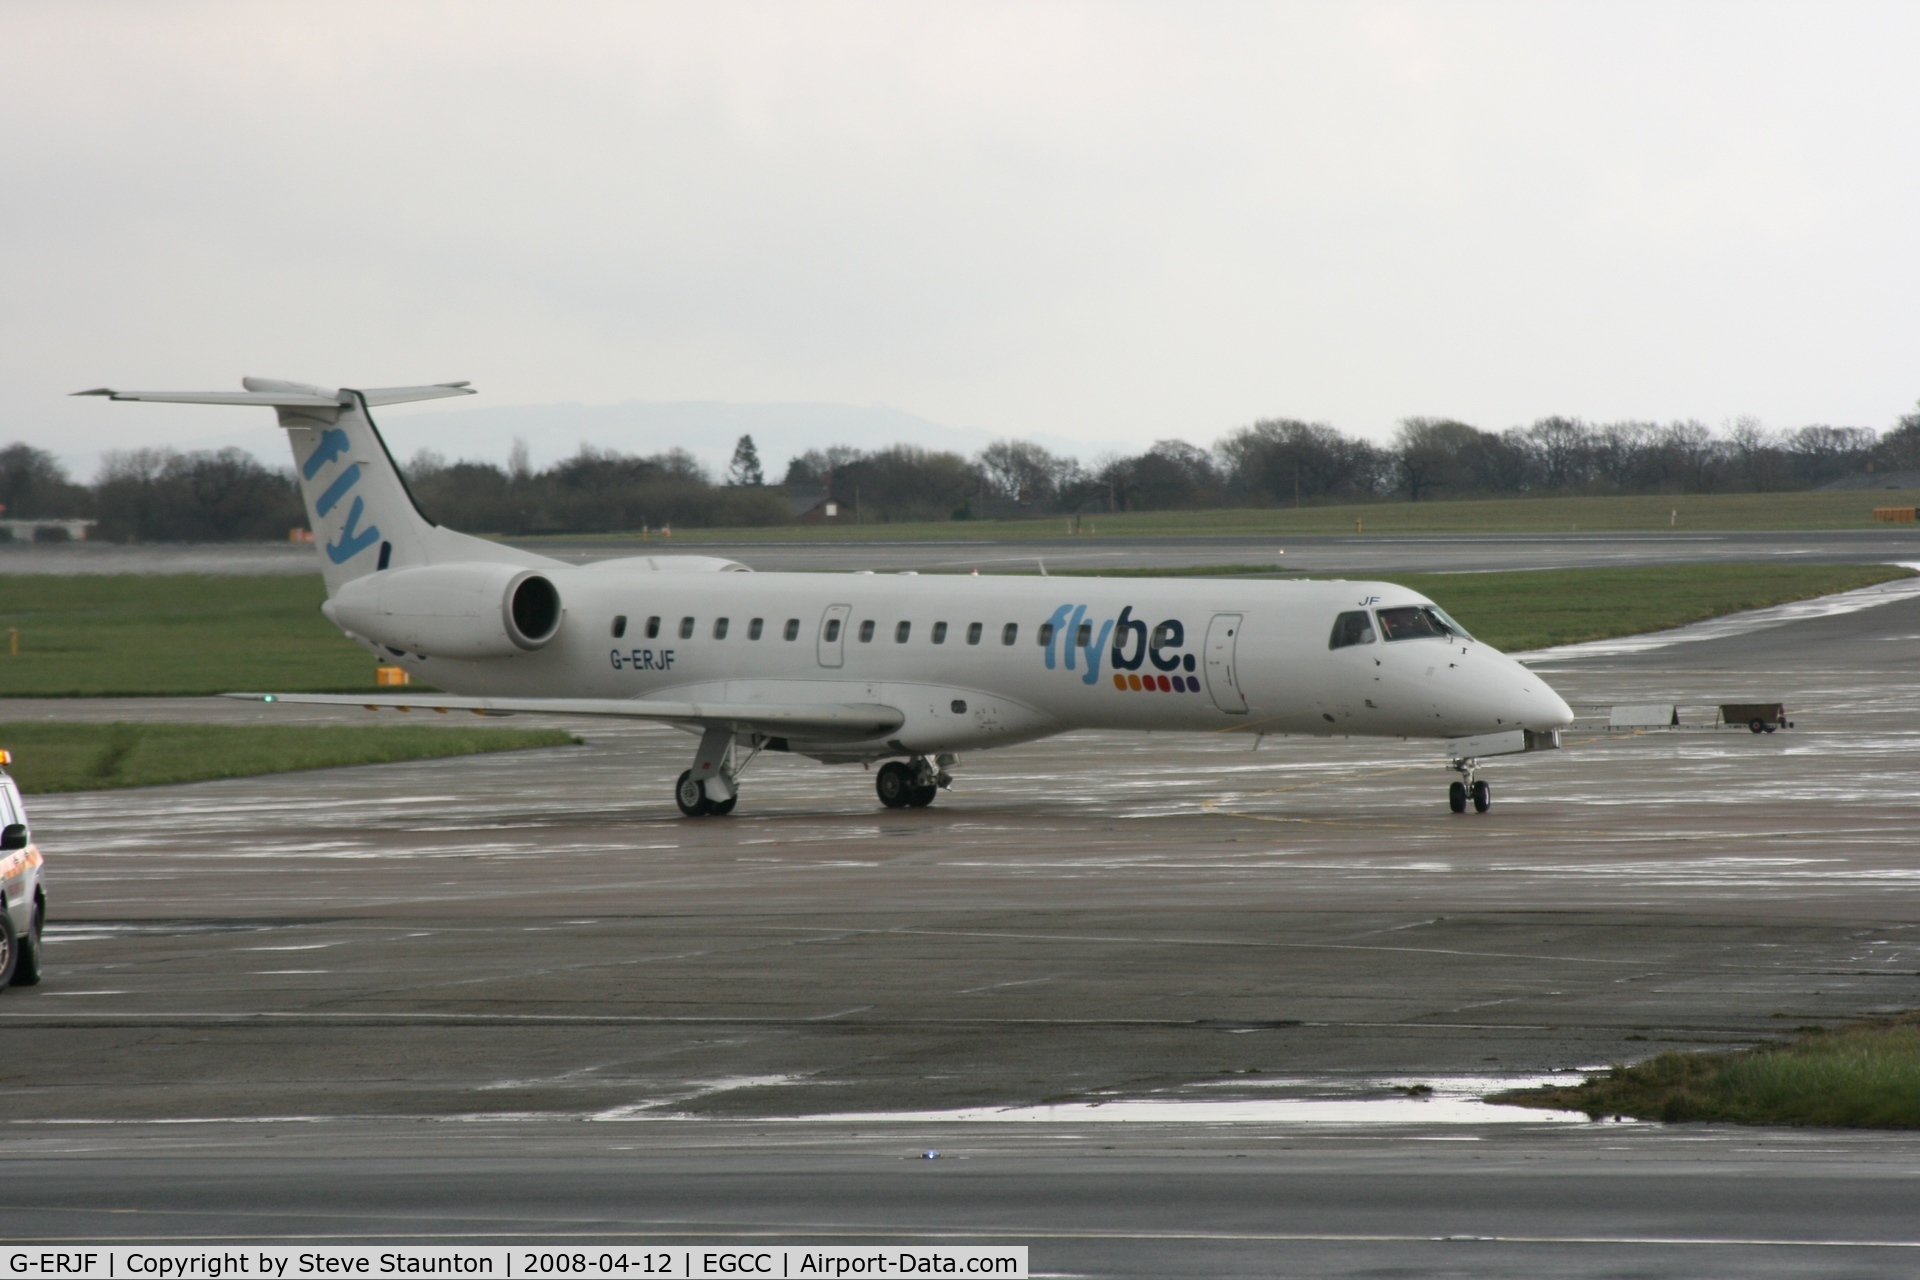 G-ERJF, 2000 Embraer EMB-145EP (ERJ-145EP) C/N 145325, Taken at Manchester Airport on a typical showery April day